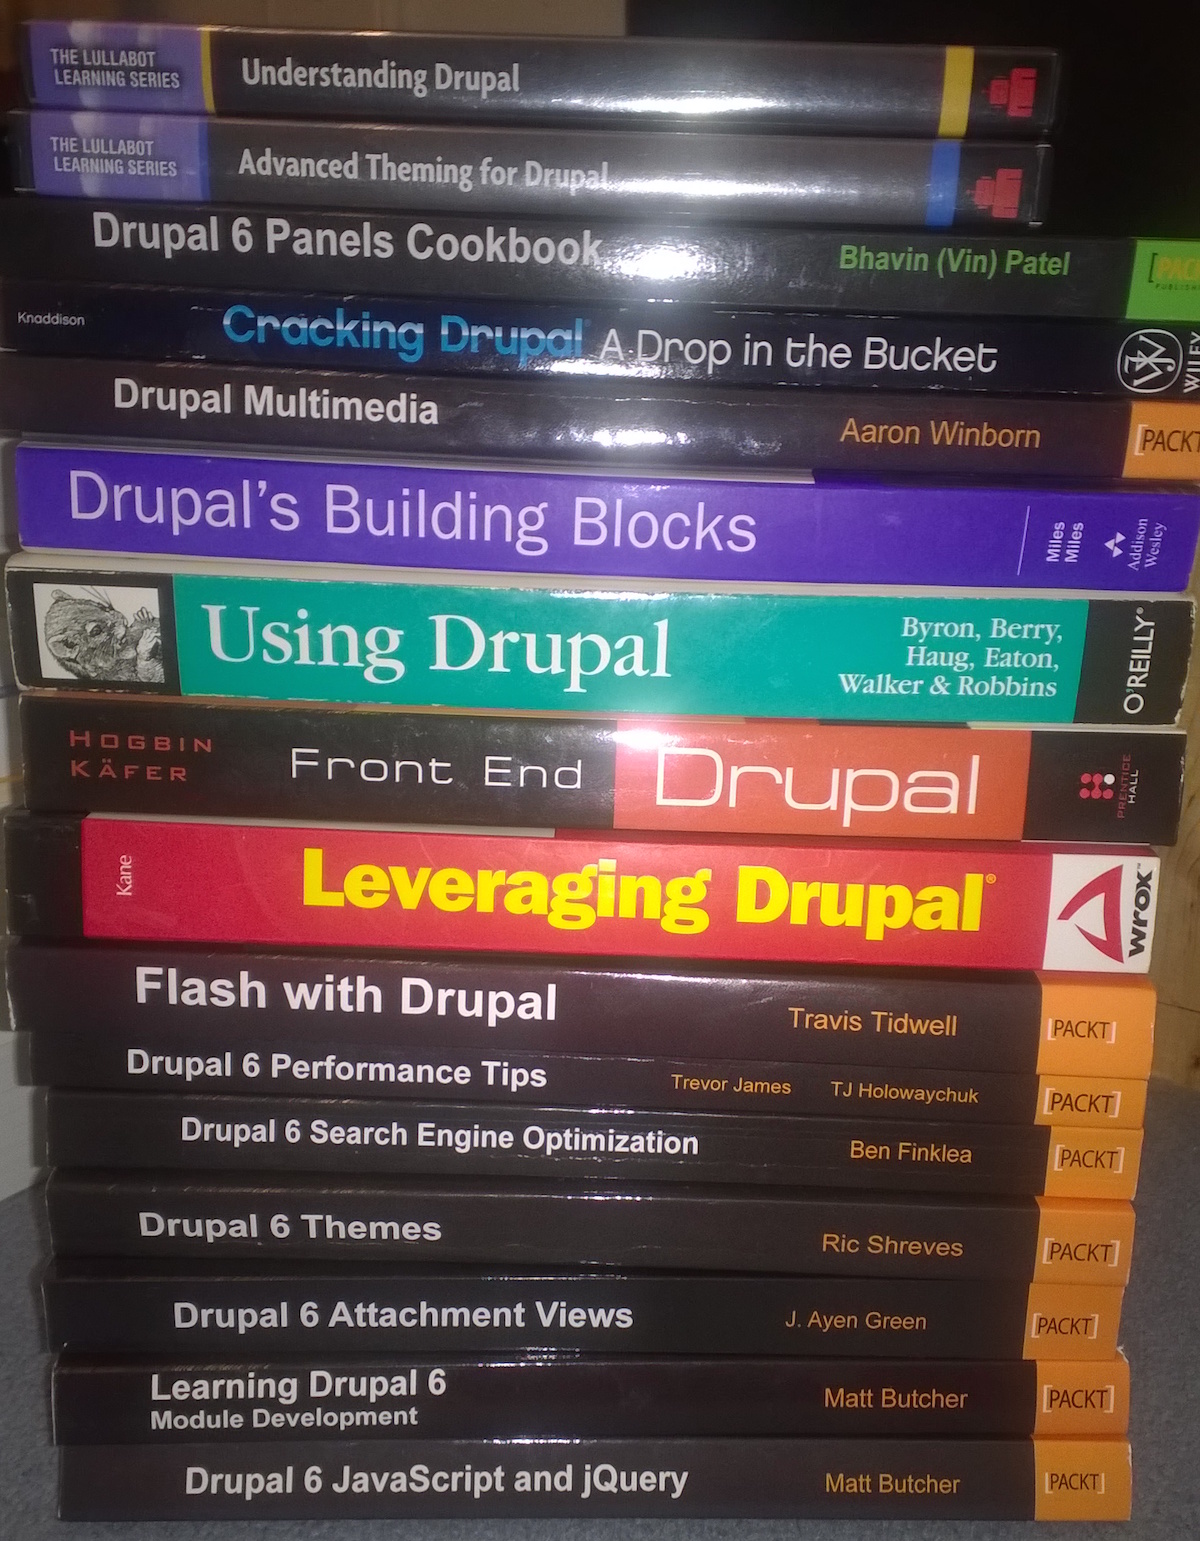 Pile of Drupal books up for grabs